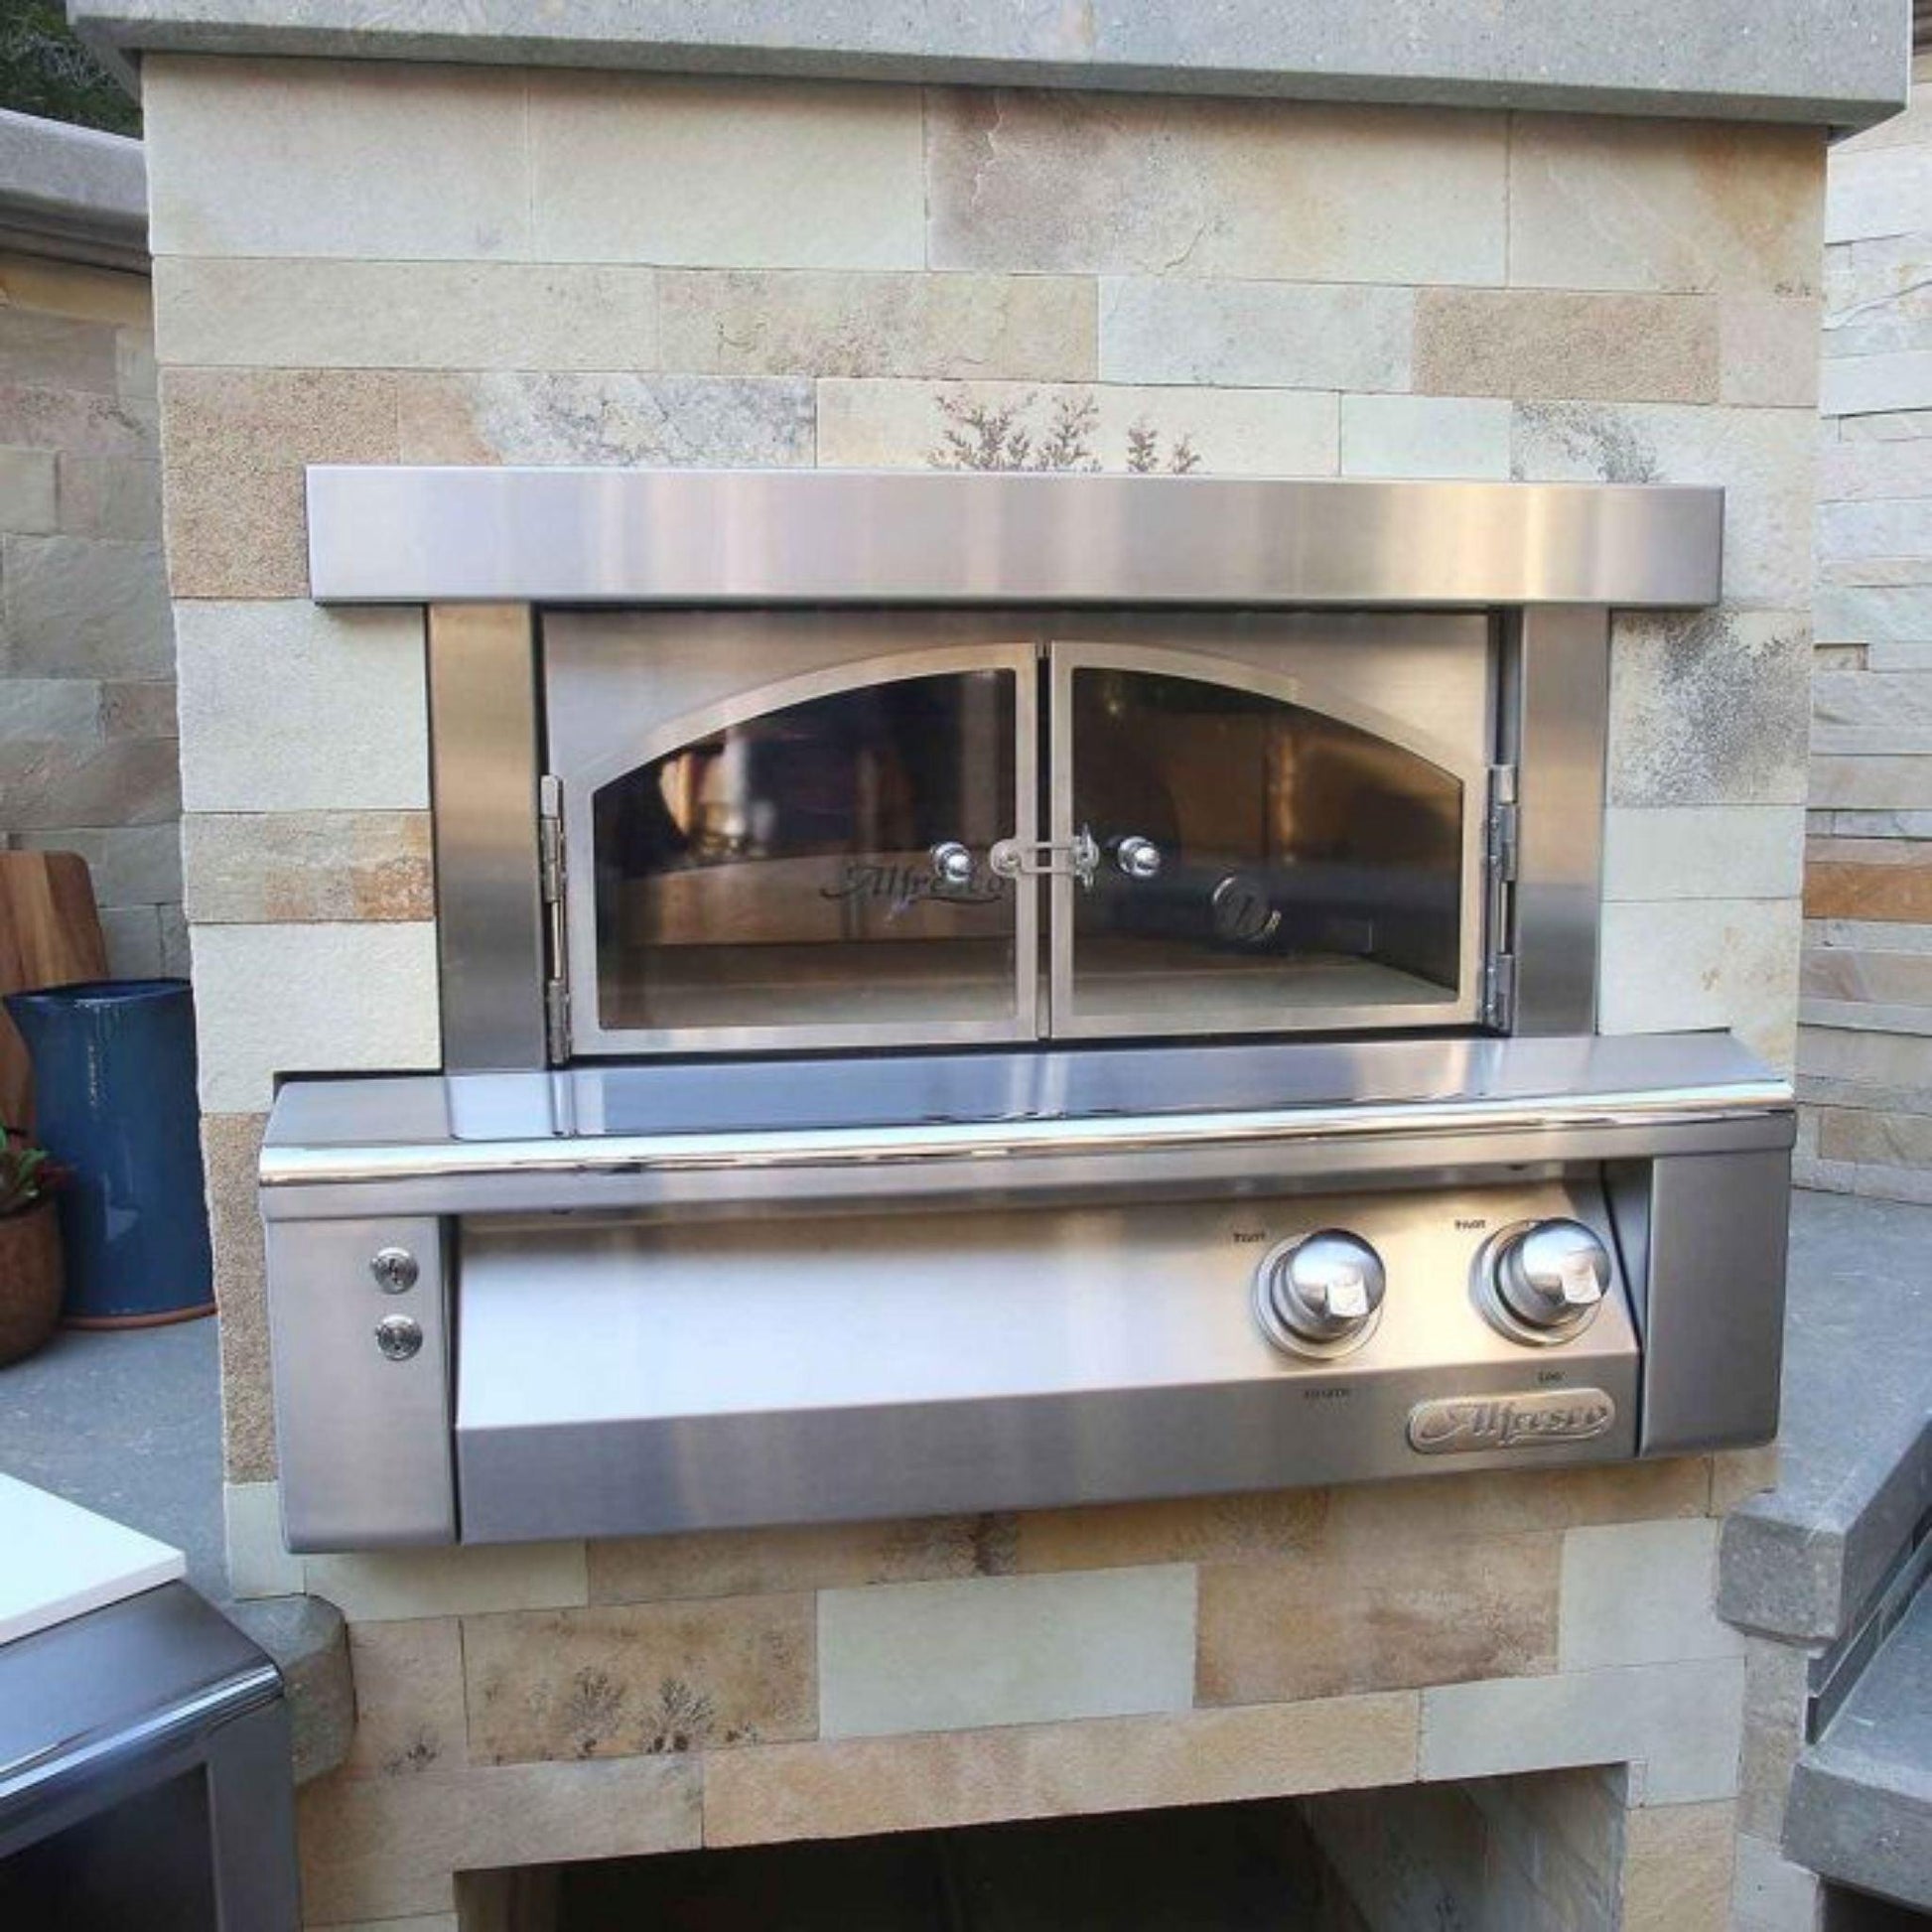 Alfresco 30" Jet Black Matte Natural Gas Pizza Oven for Built-in Installations